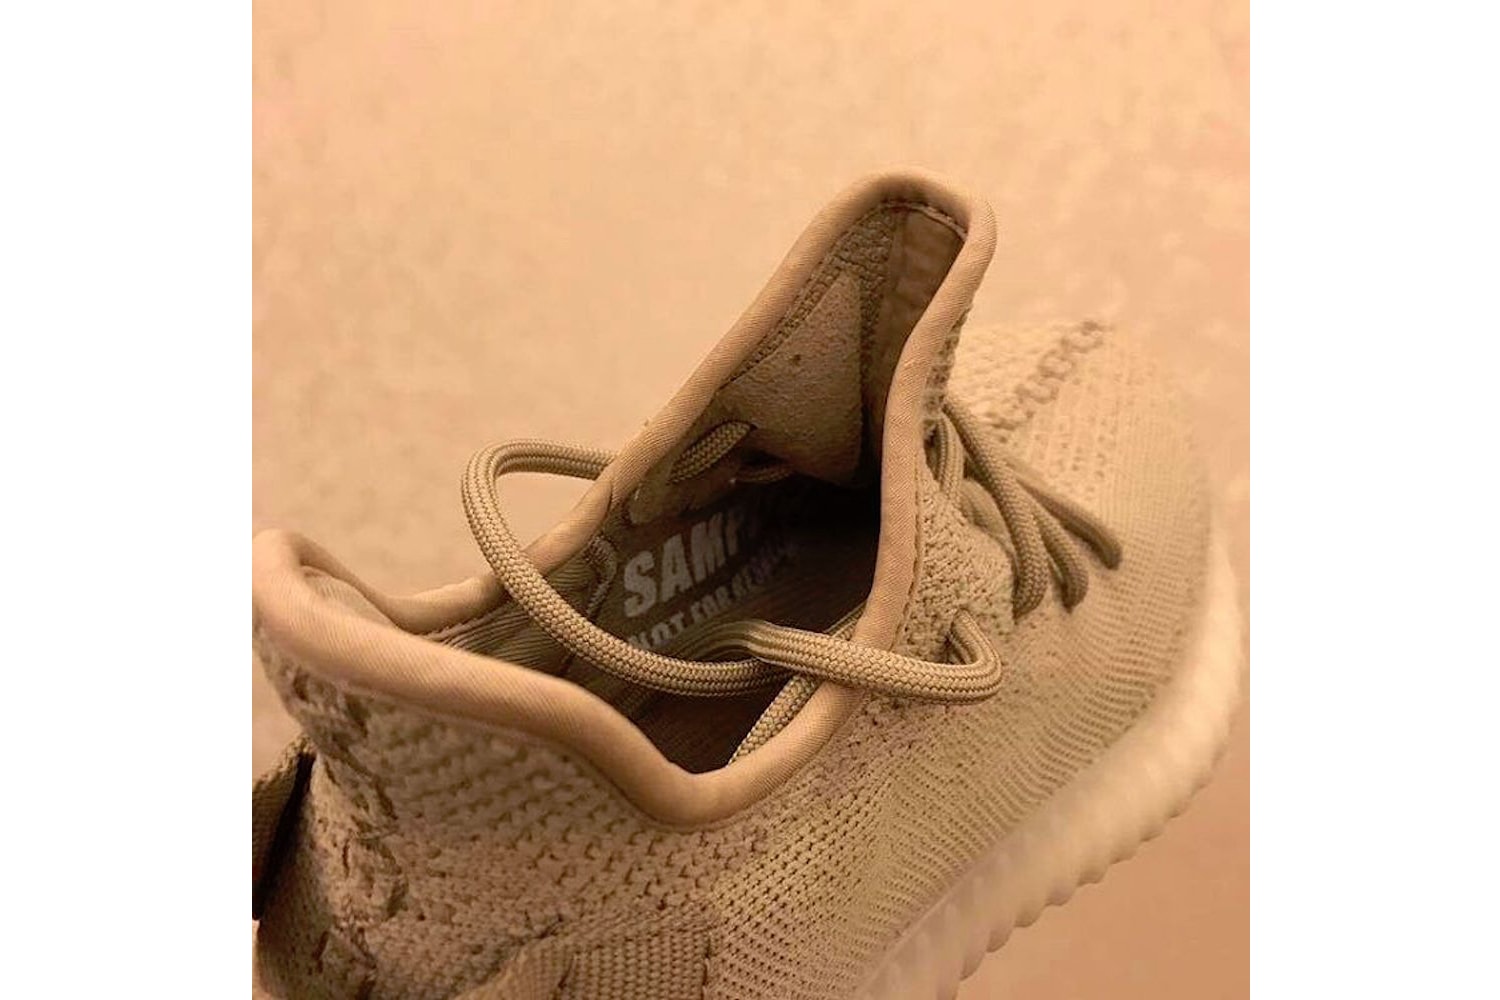 YEEZY BOOST 350 V2 "Earth" First Look